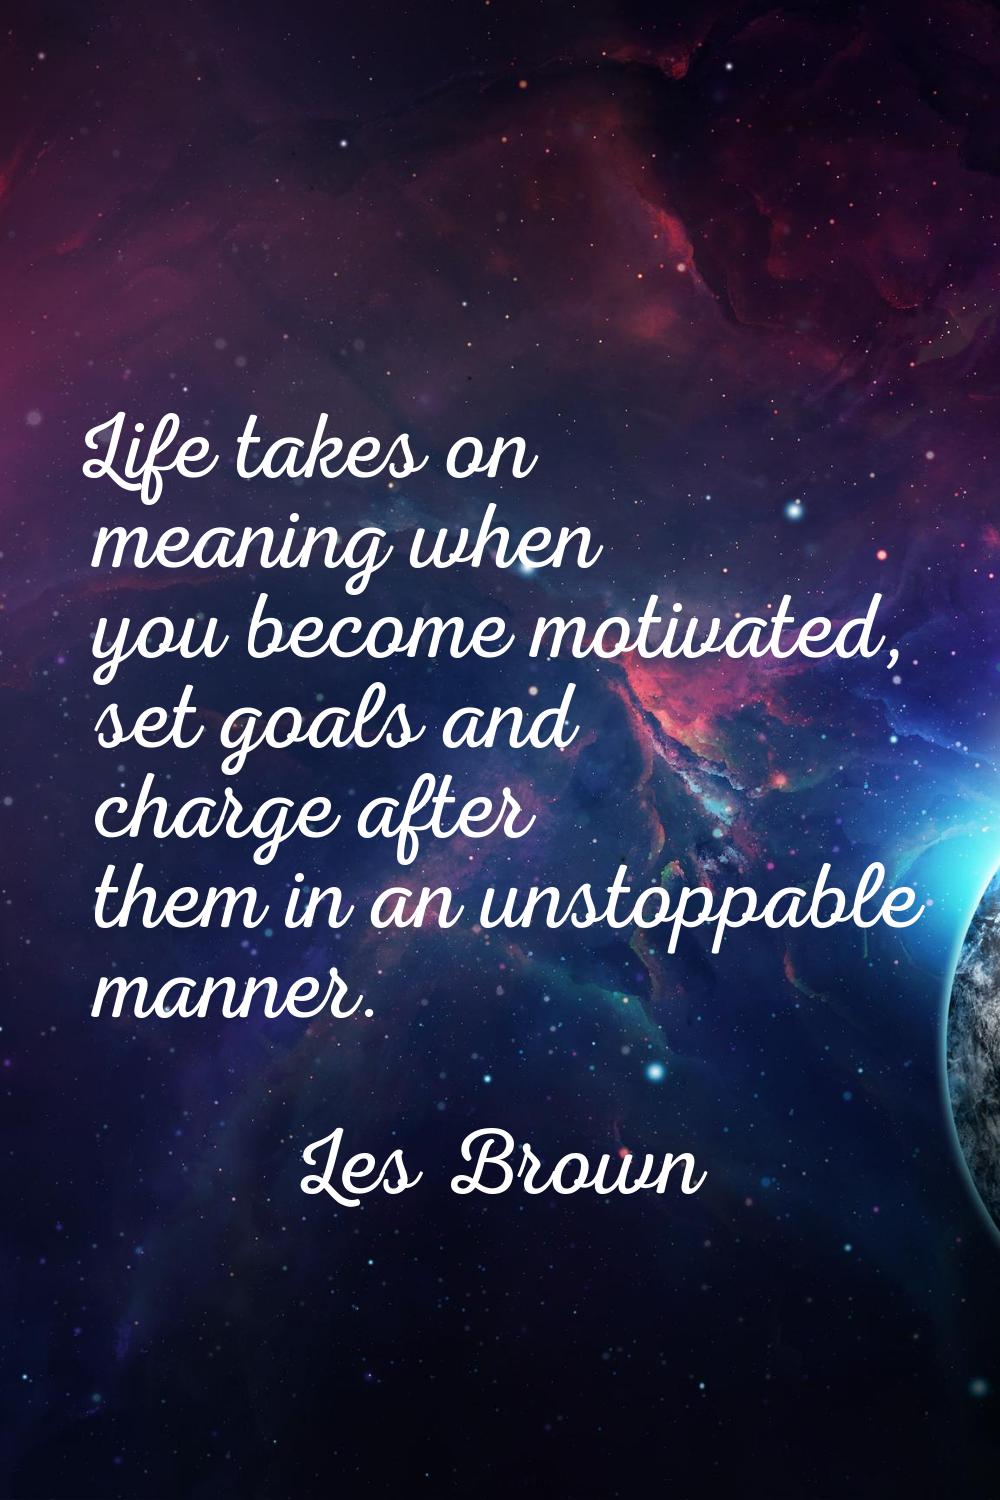 Life takes on meaning when you become motivated, set goals and charge after them in an unstoppable 